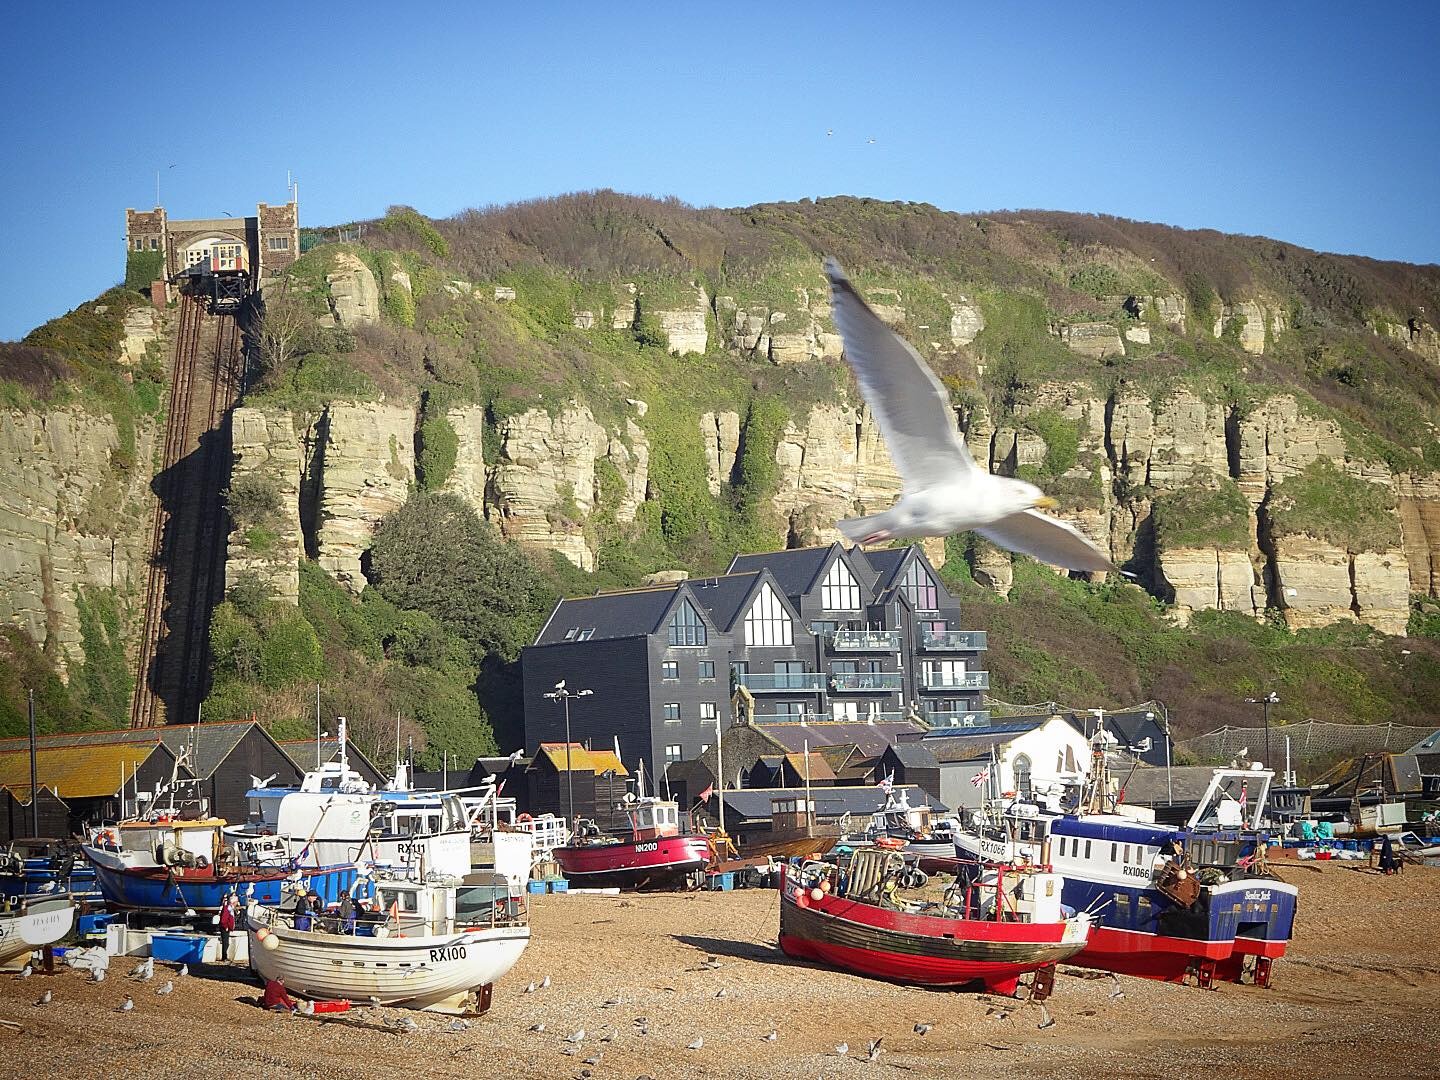 Photograph by Instagram user @boburke1 of Hastings East Hill from the fishing beach with a mid-flight seagull in the foreground.